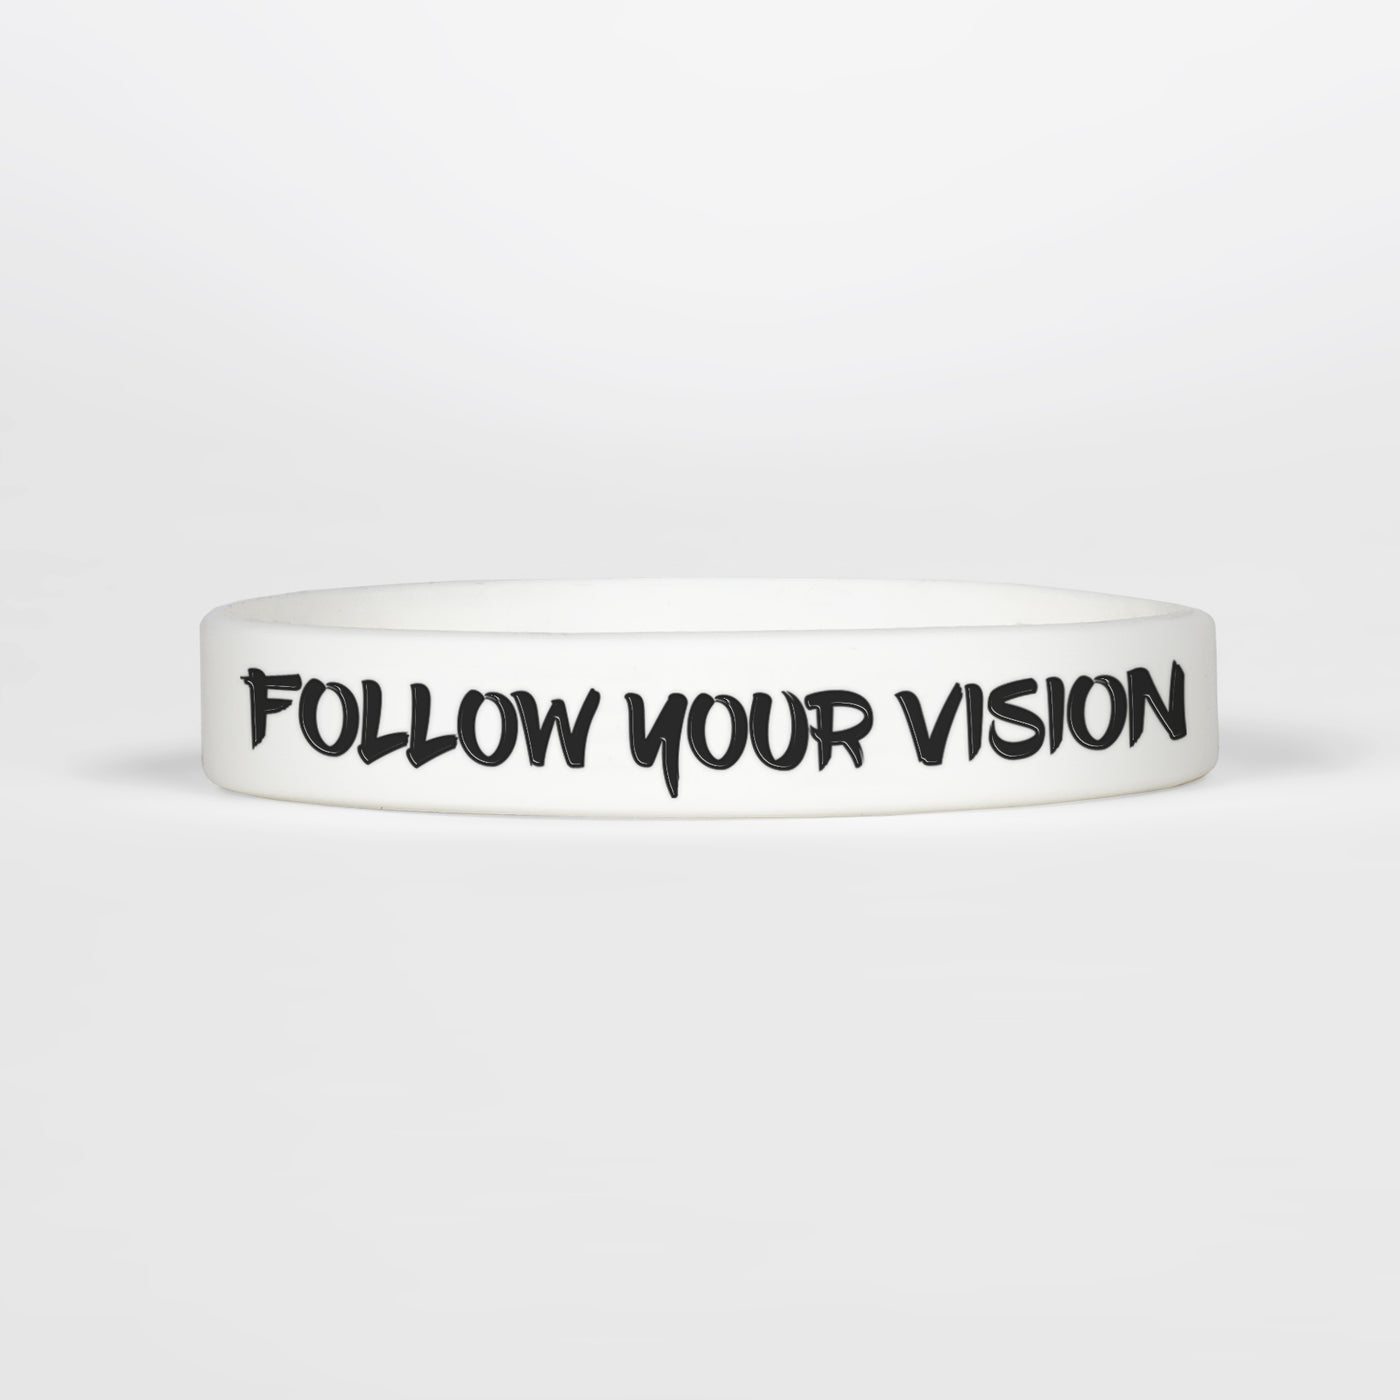 Follow Your Vision Motivational Wristband